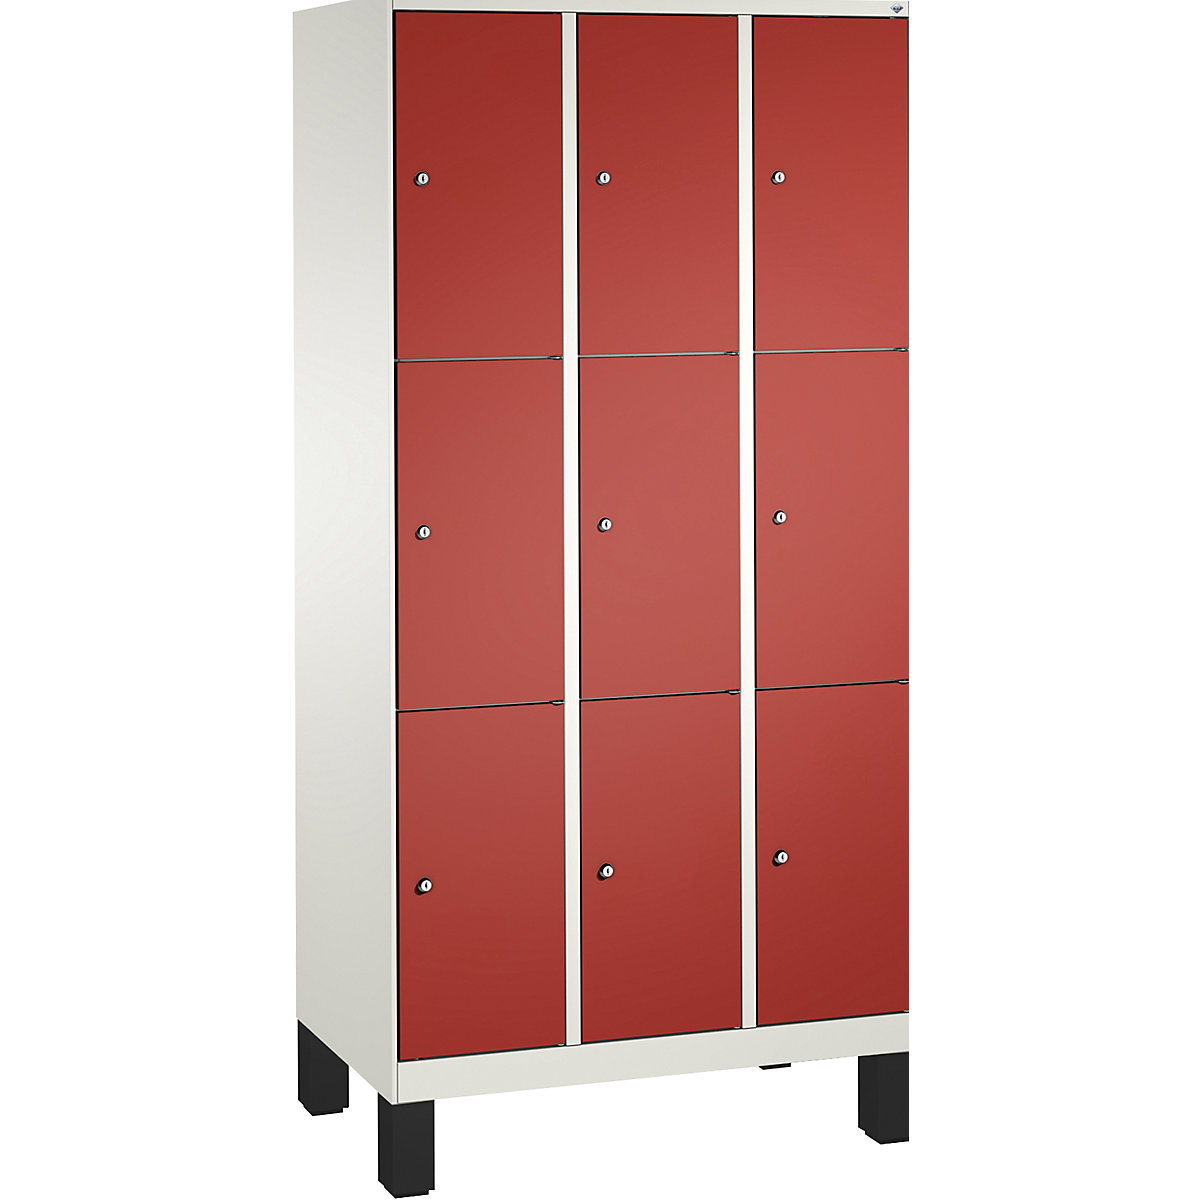 EVOLO locker unit, with feet – C+P, 3 compartments, 3 shelf compartments each, compartment width 300 mm, traffic white / flame red-8